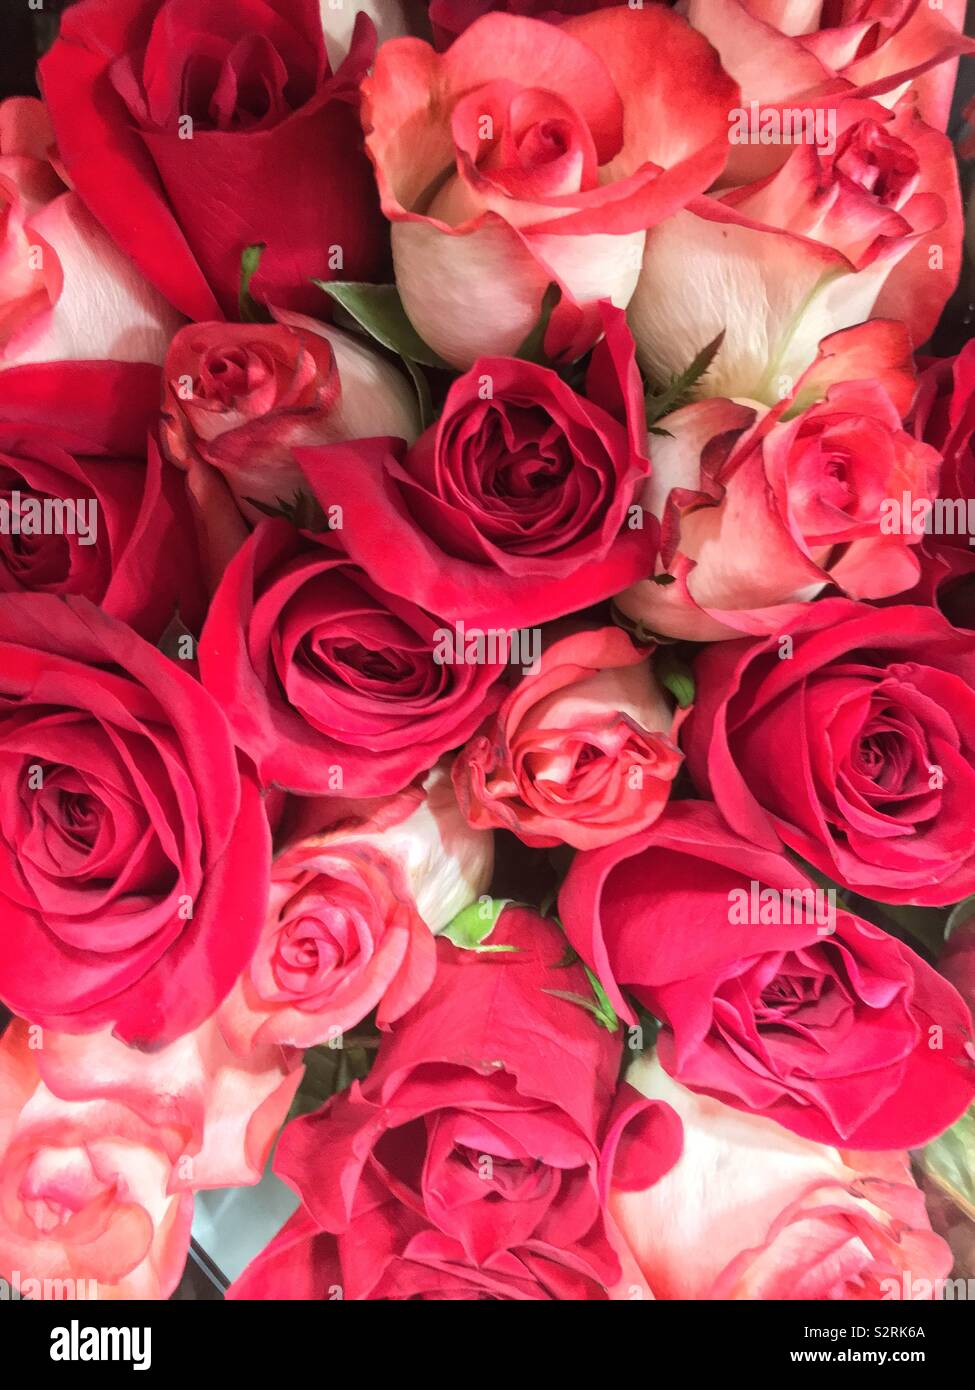 Beautiful bouquet of fresh red and white roses with pink accents. Stock Photo